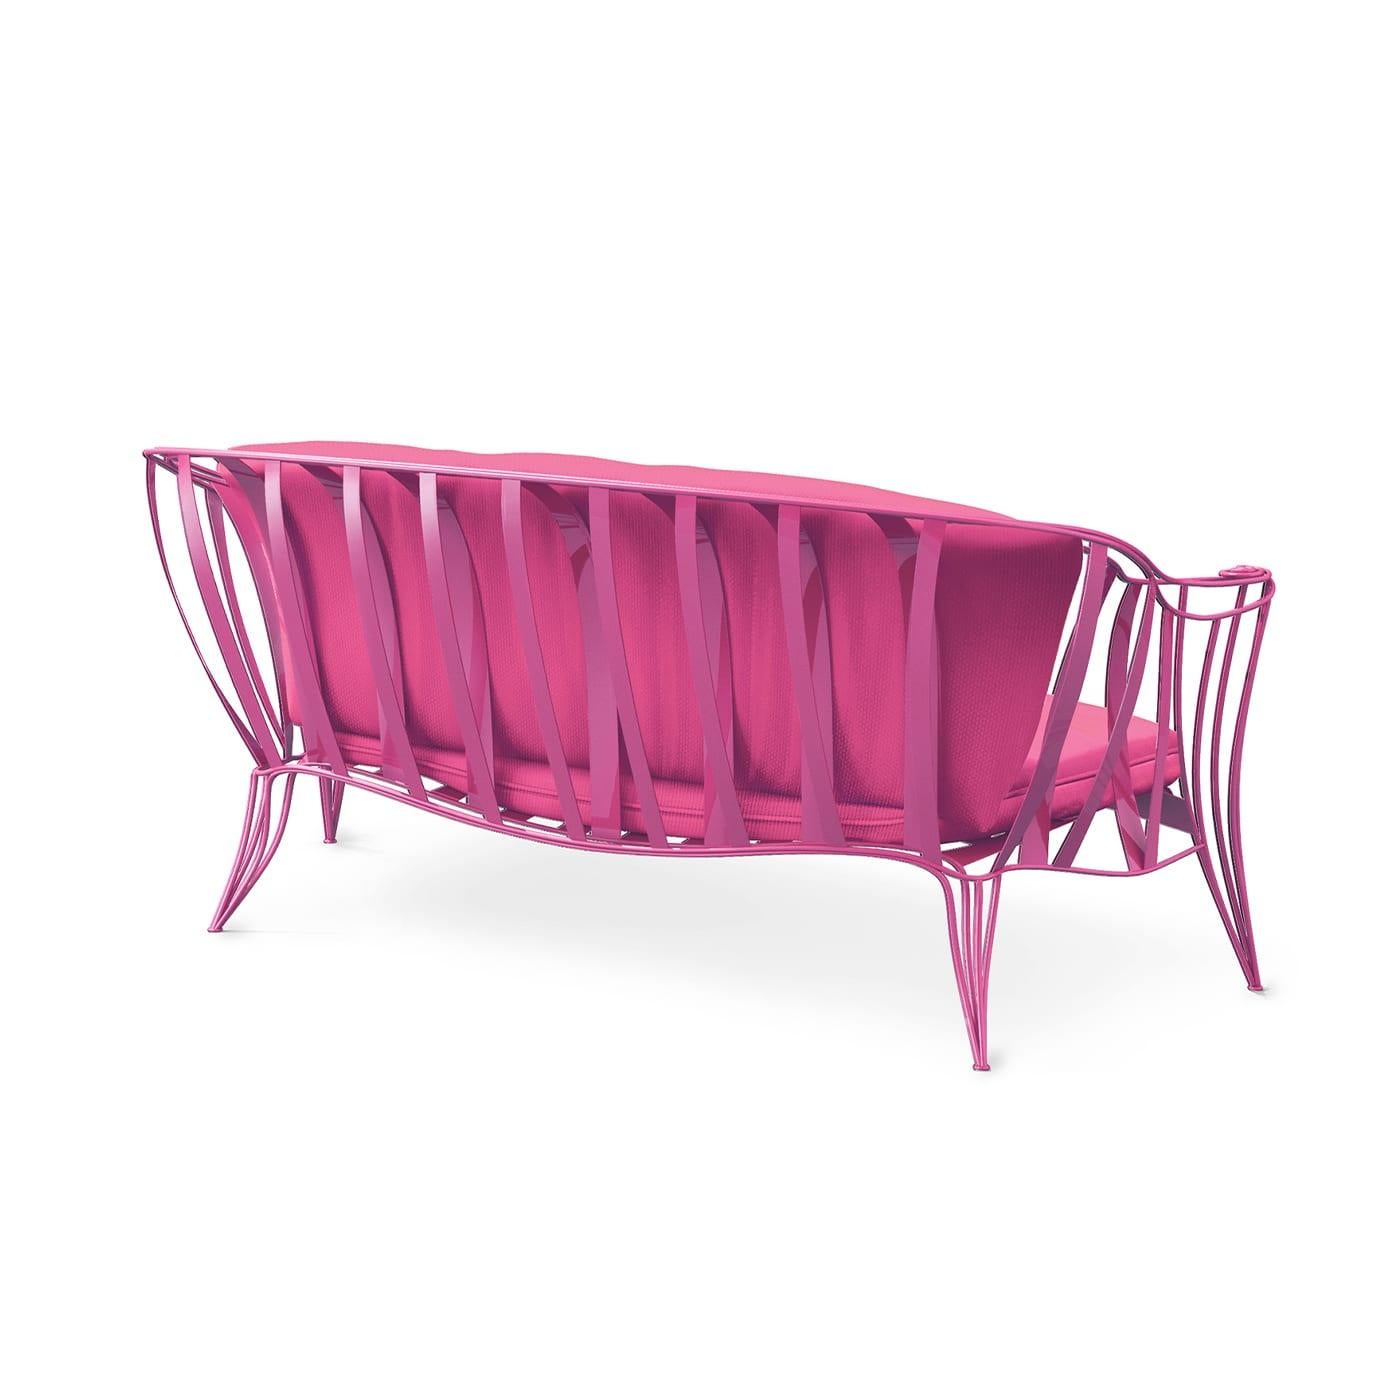 Romantic and airy, this garden sofa by Carlo Rampazzi will add a glamorous accent to any outdoor space. Its enveloping iron frame is bent by hand and enriched with a special rust-resistant treatment allowing the vivid fuchsia lacquer to preserve its